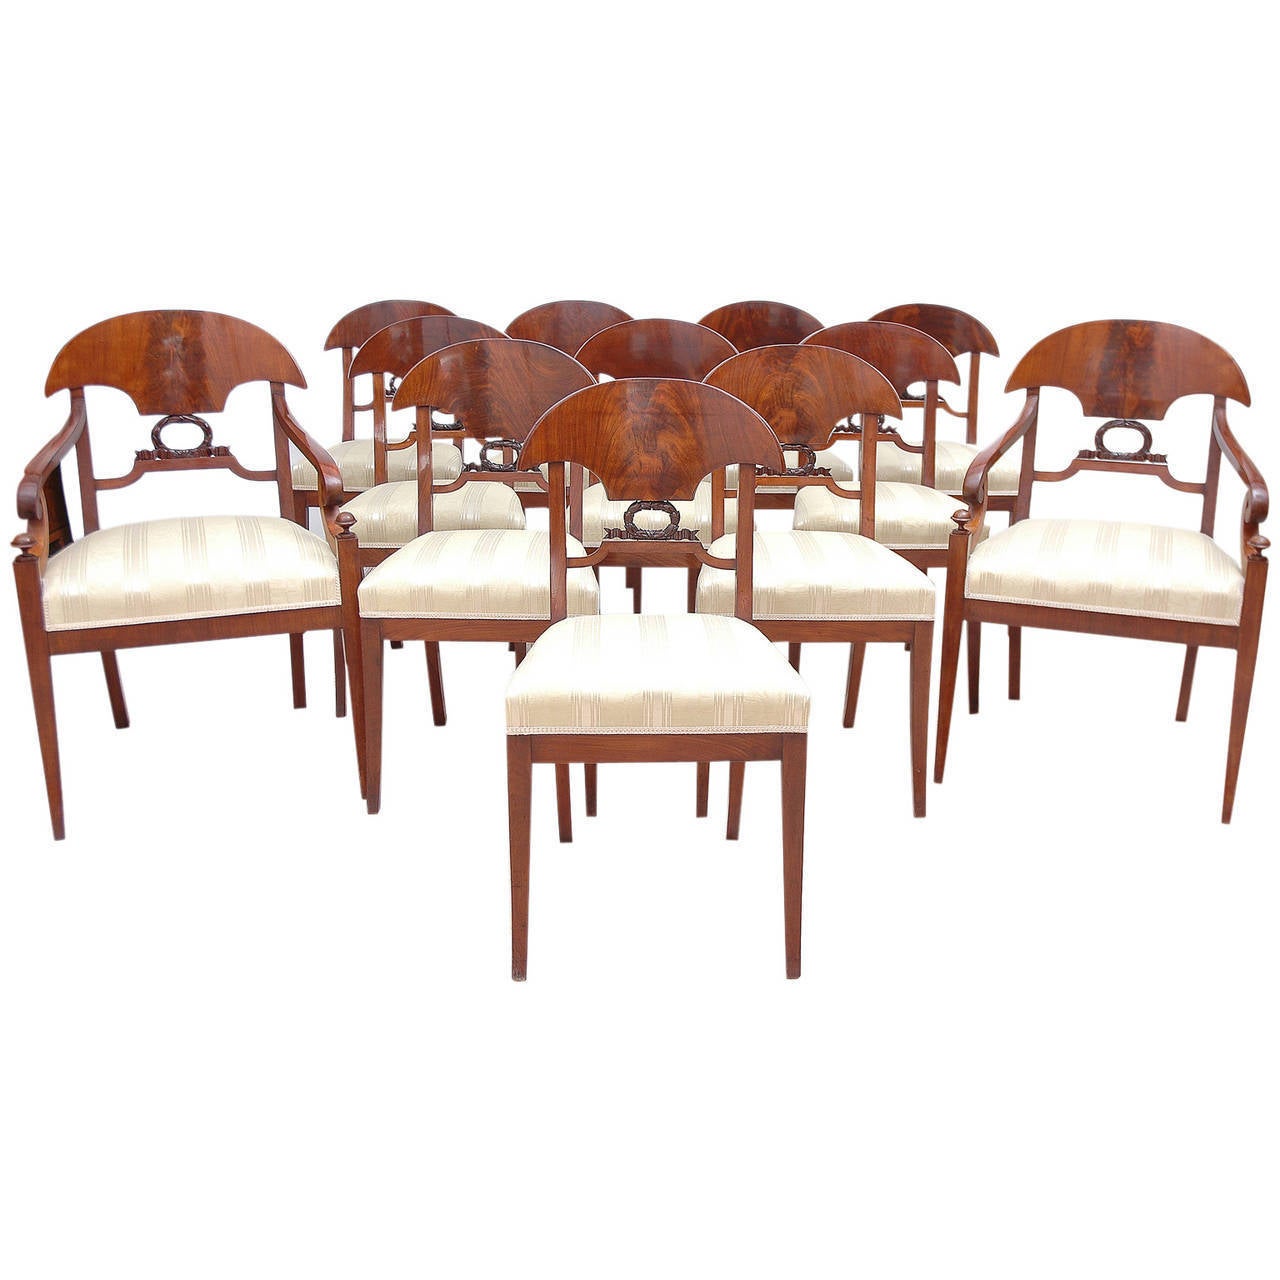 Original set of 12 Empire mahogany dining chairs from the reign of Karl Johan Sweden. Openwork back with carved decoration in the shape of a laurel. Set consisting of ten side chairs and two armchairs. Textiles and upholstery from the